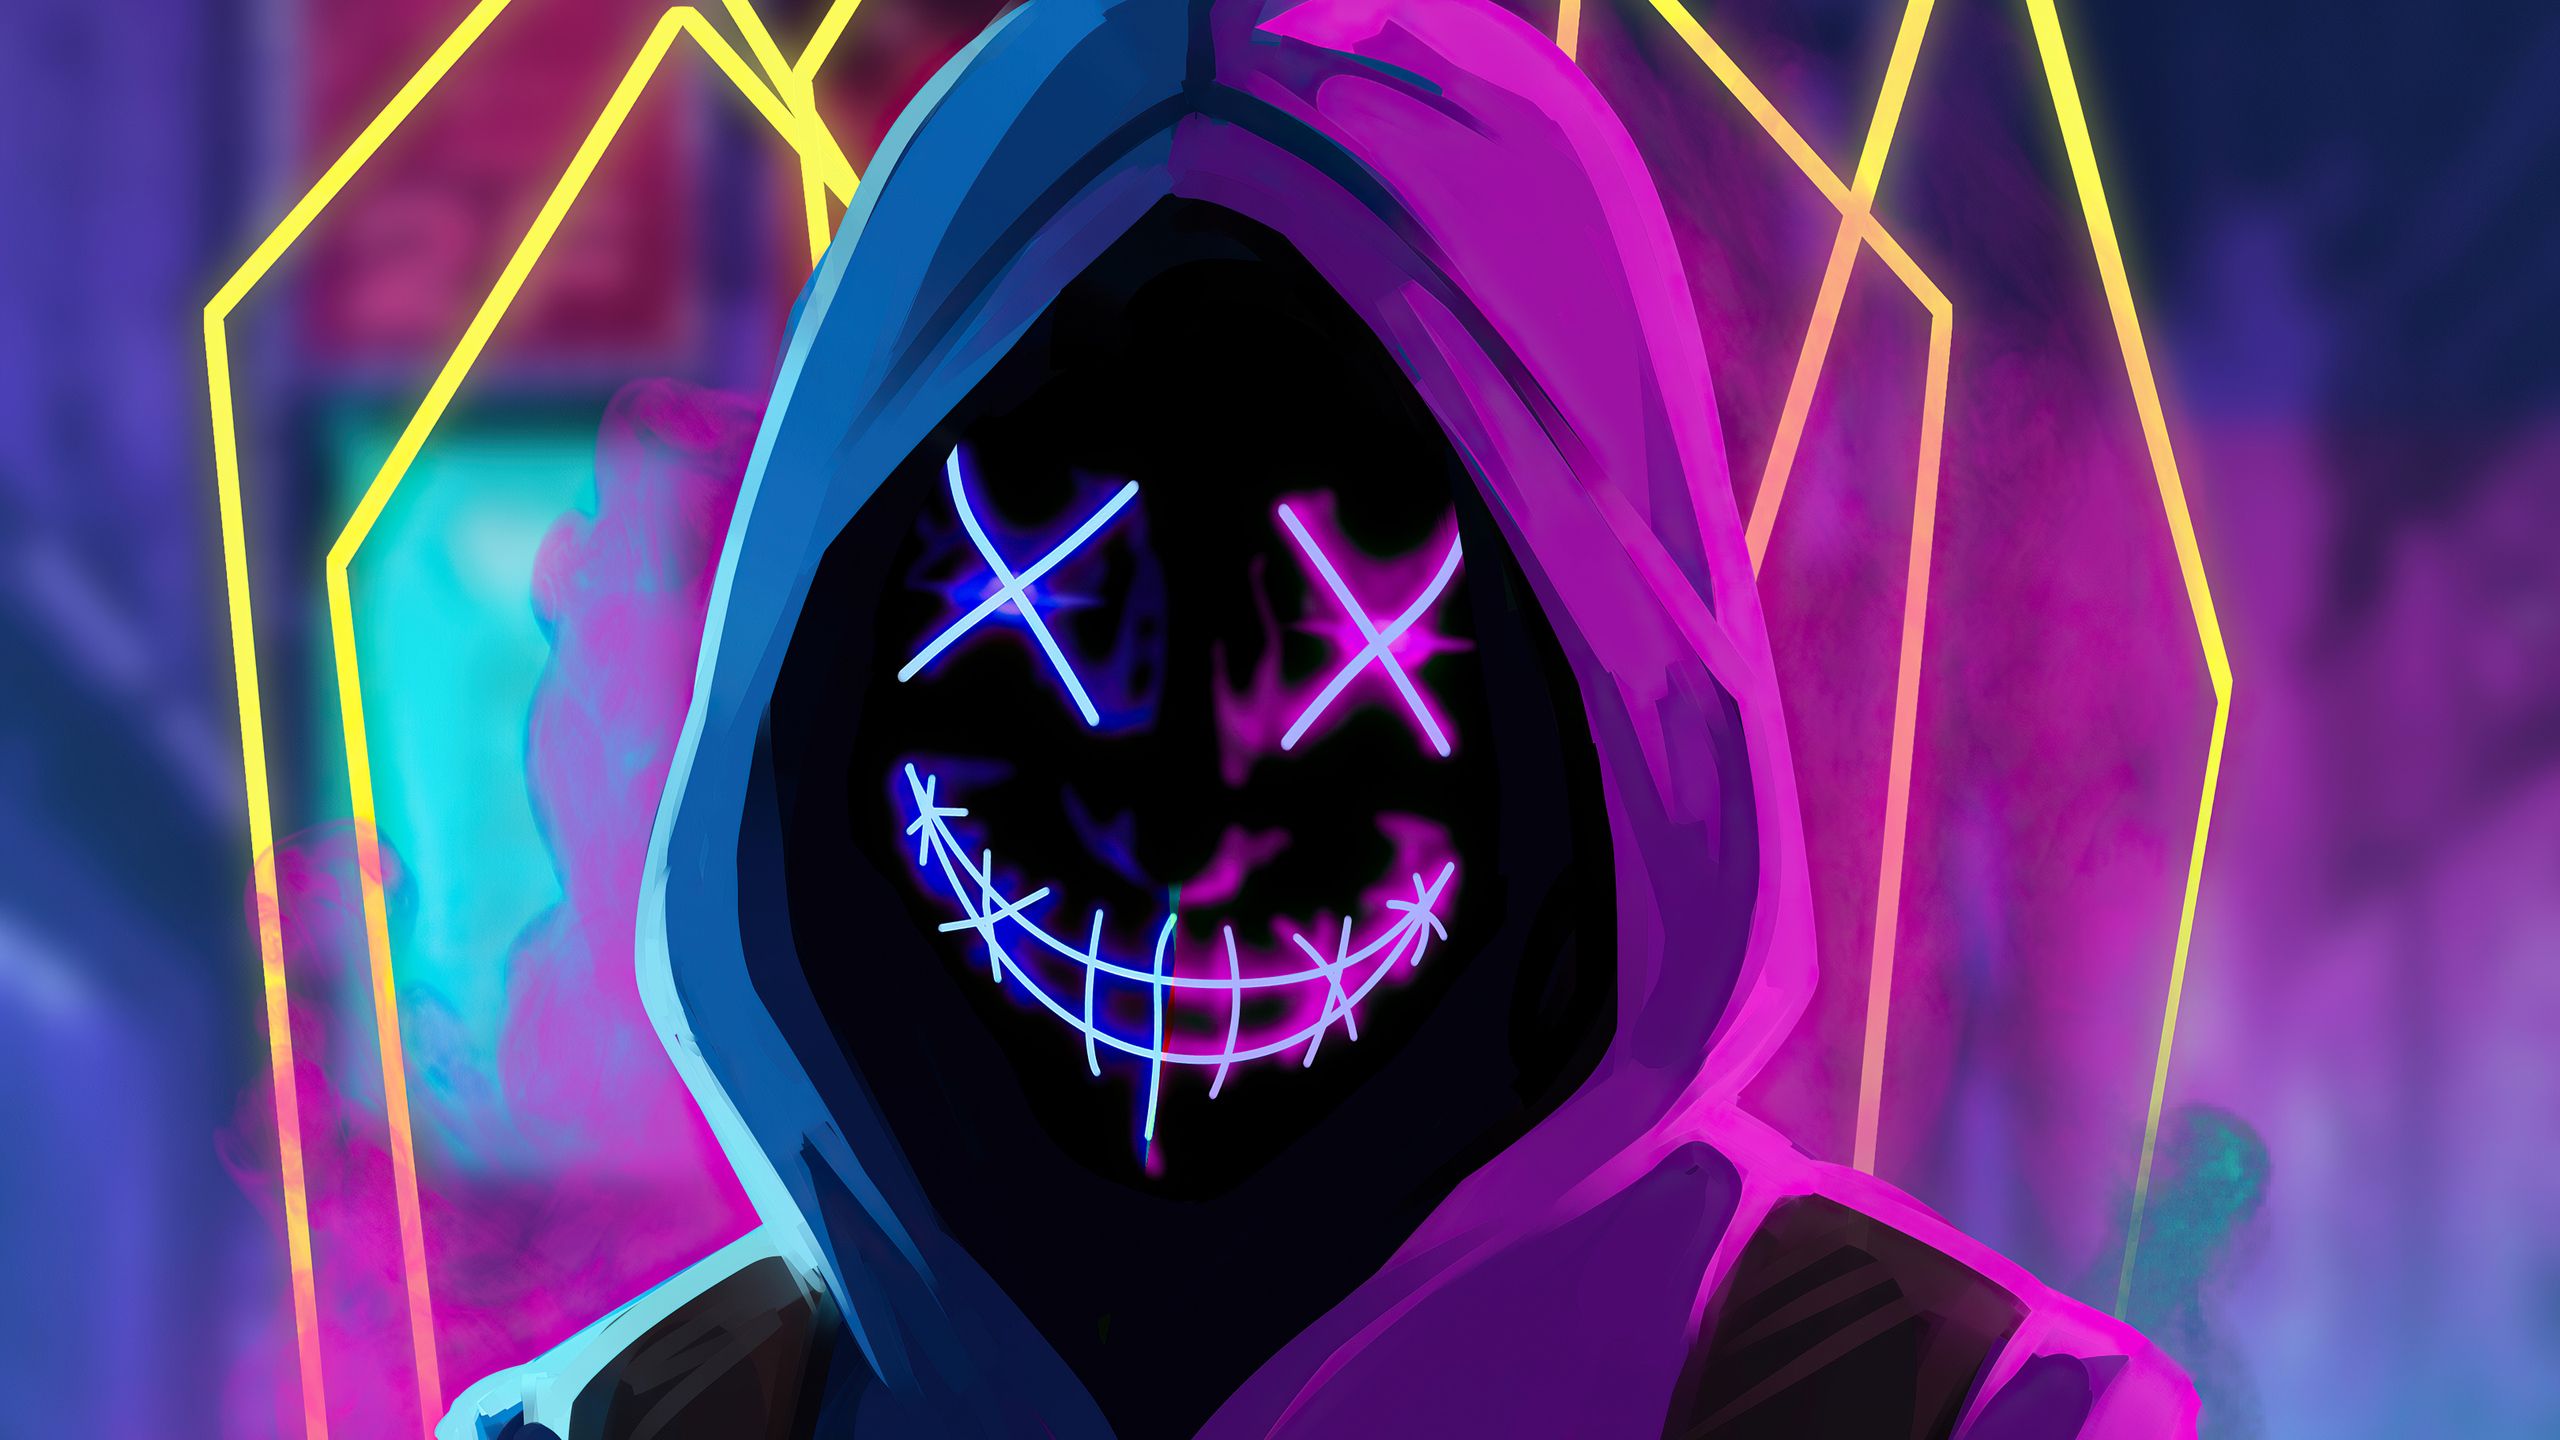 Mask Neon Guy 1440P Resolution HD 4k Wallpaper, Image, Background, Photo and Picture